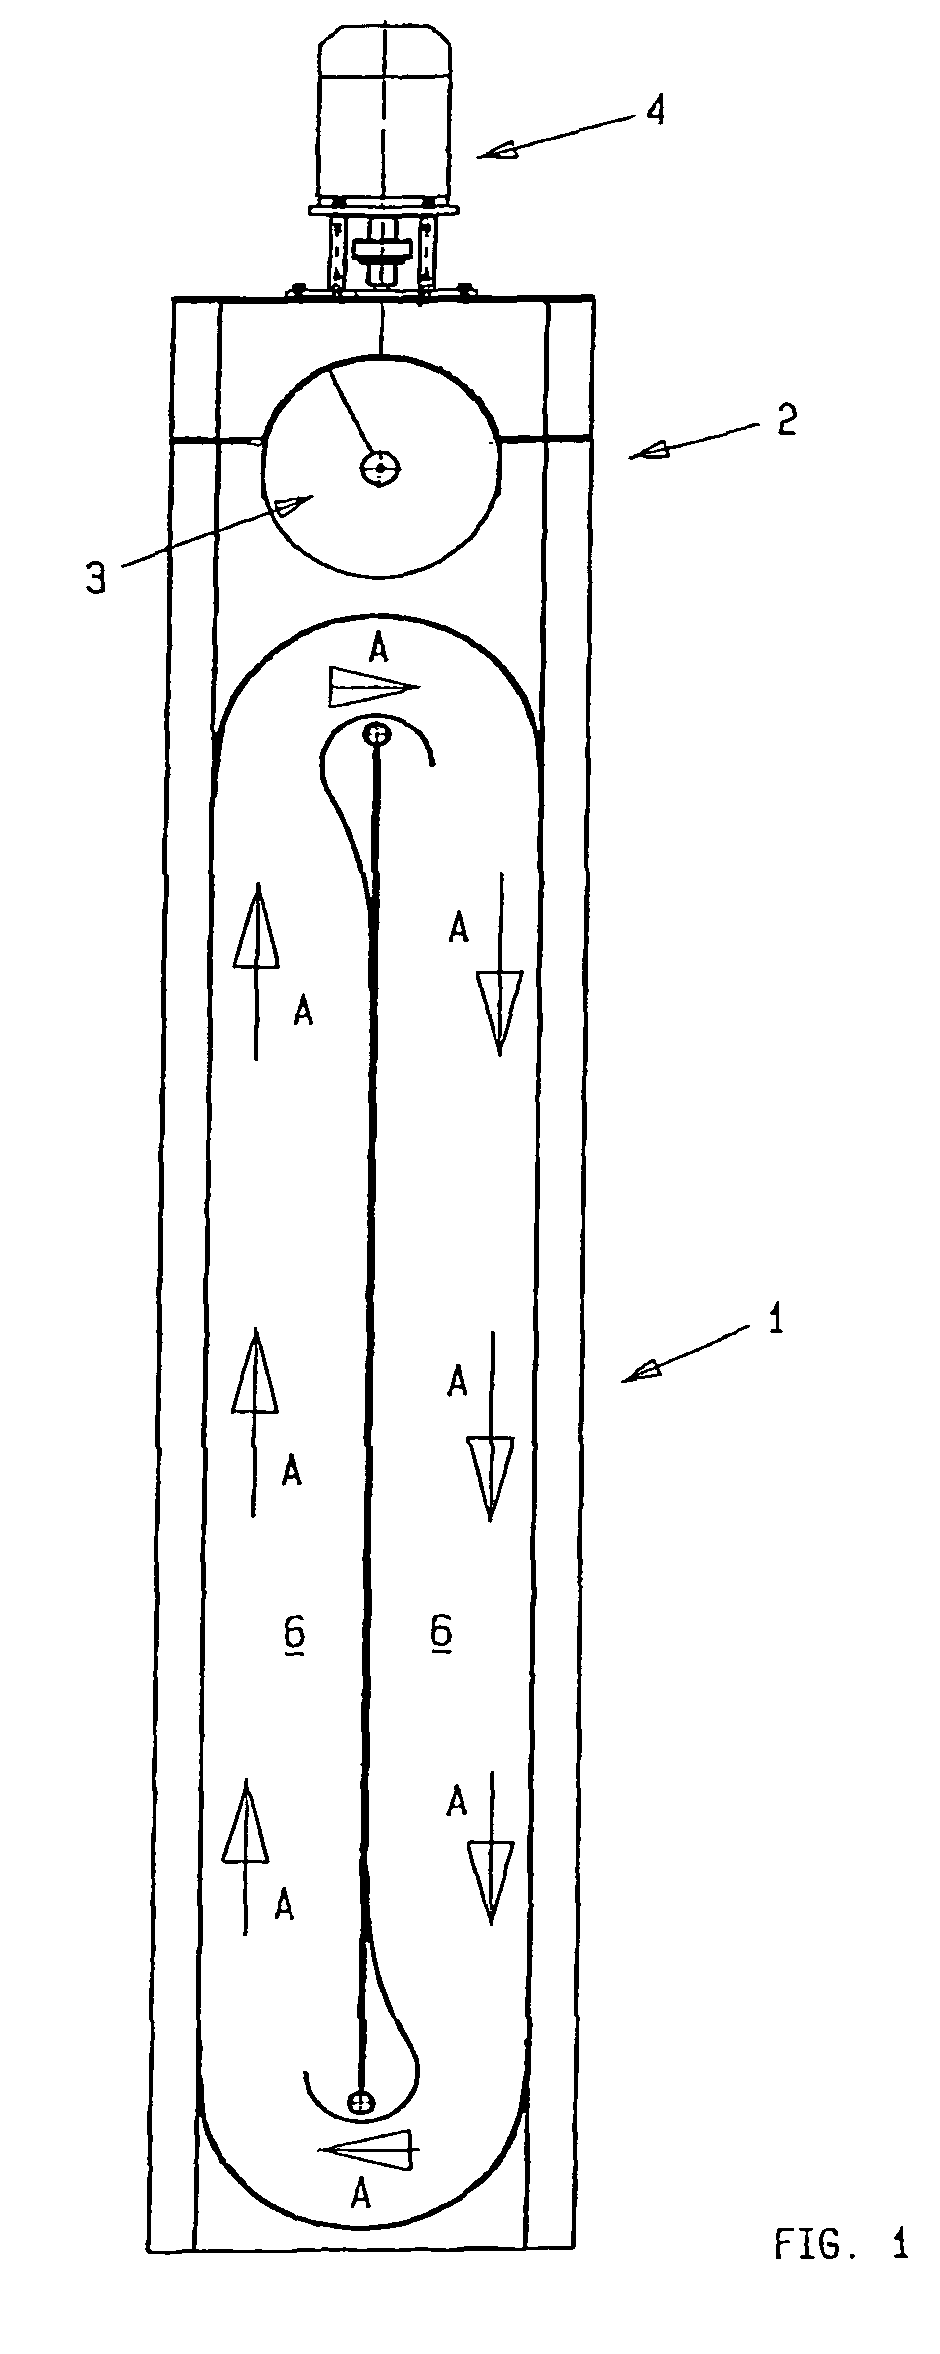 Scalding apparatus for poultry